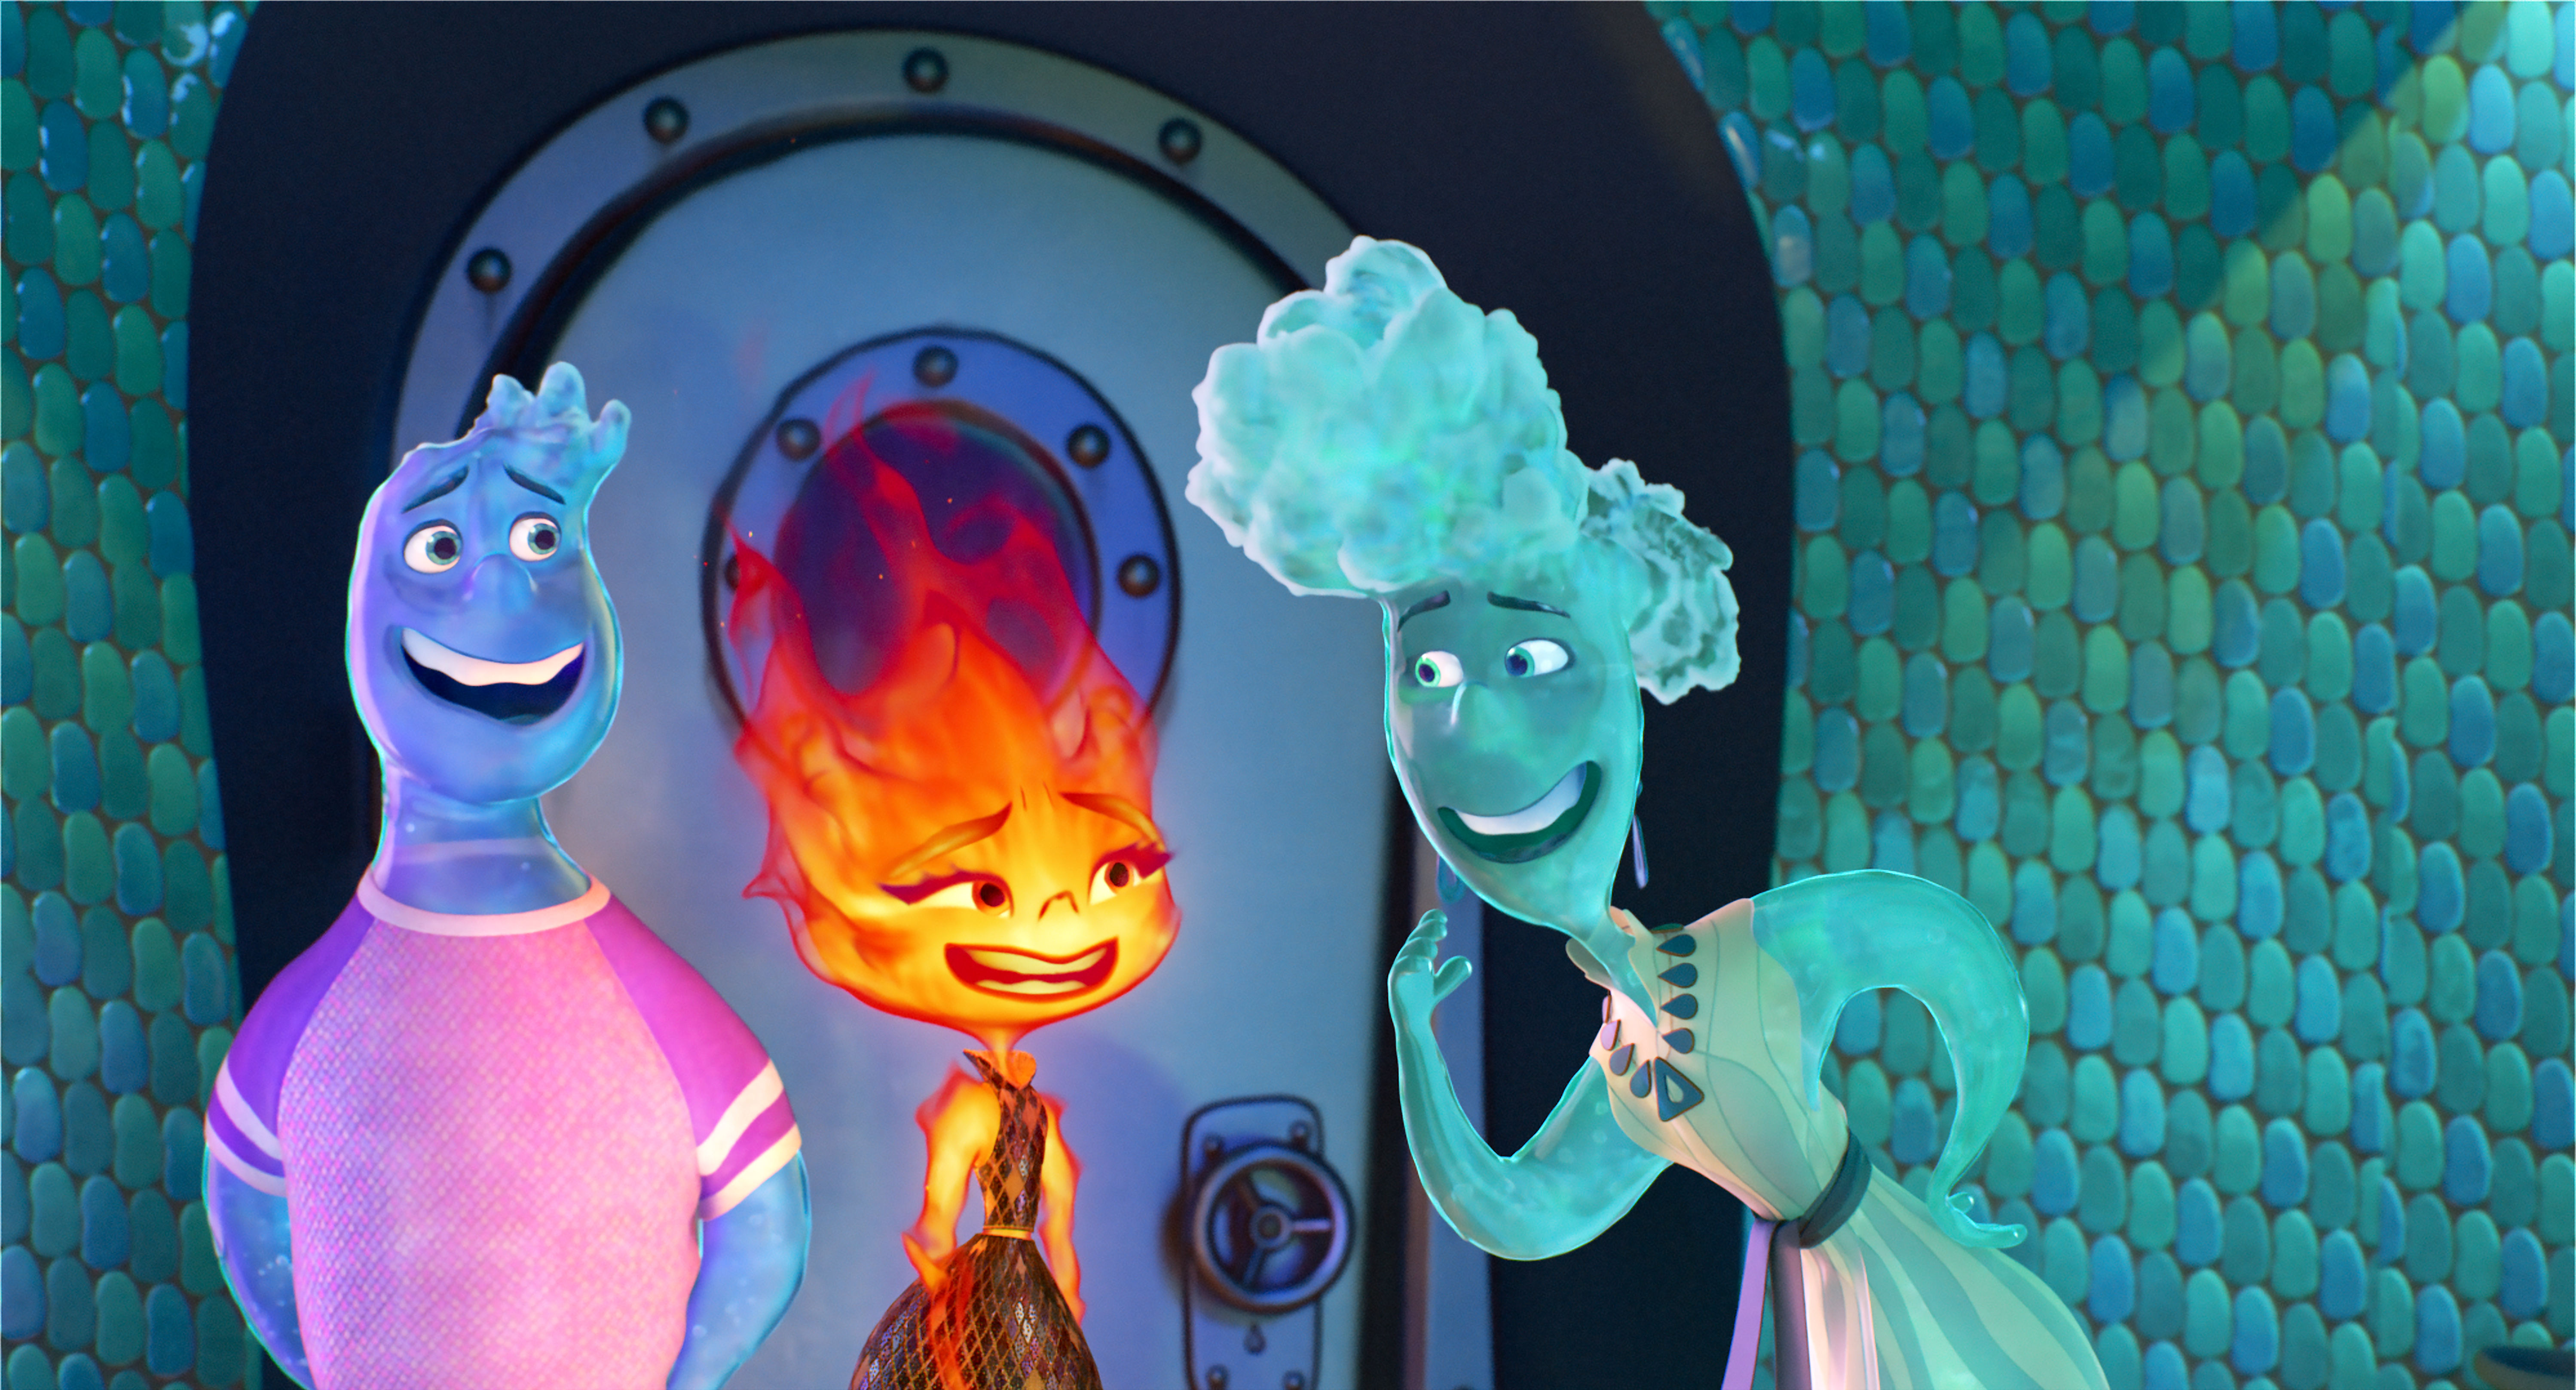 Tickets For Pixar’s ‘Elemental’ on Sale Now